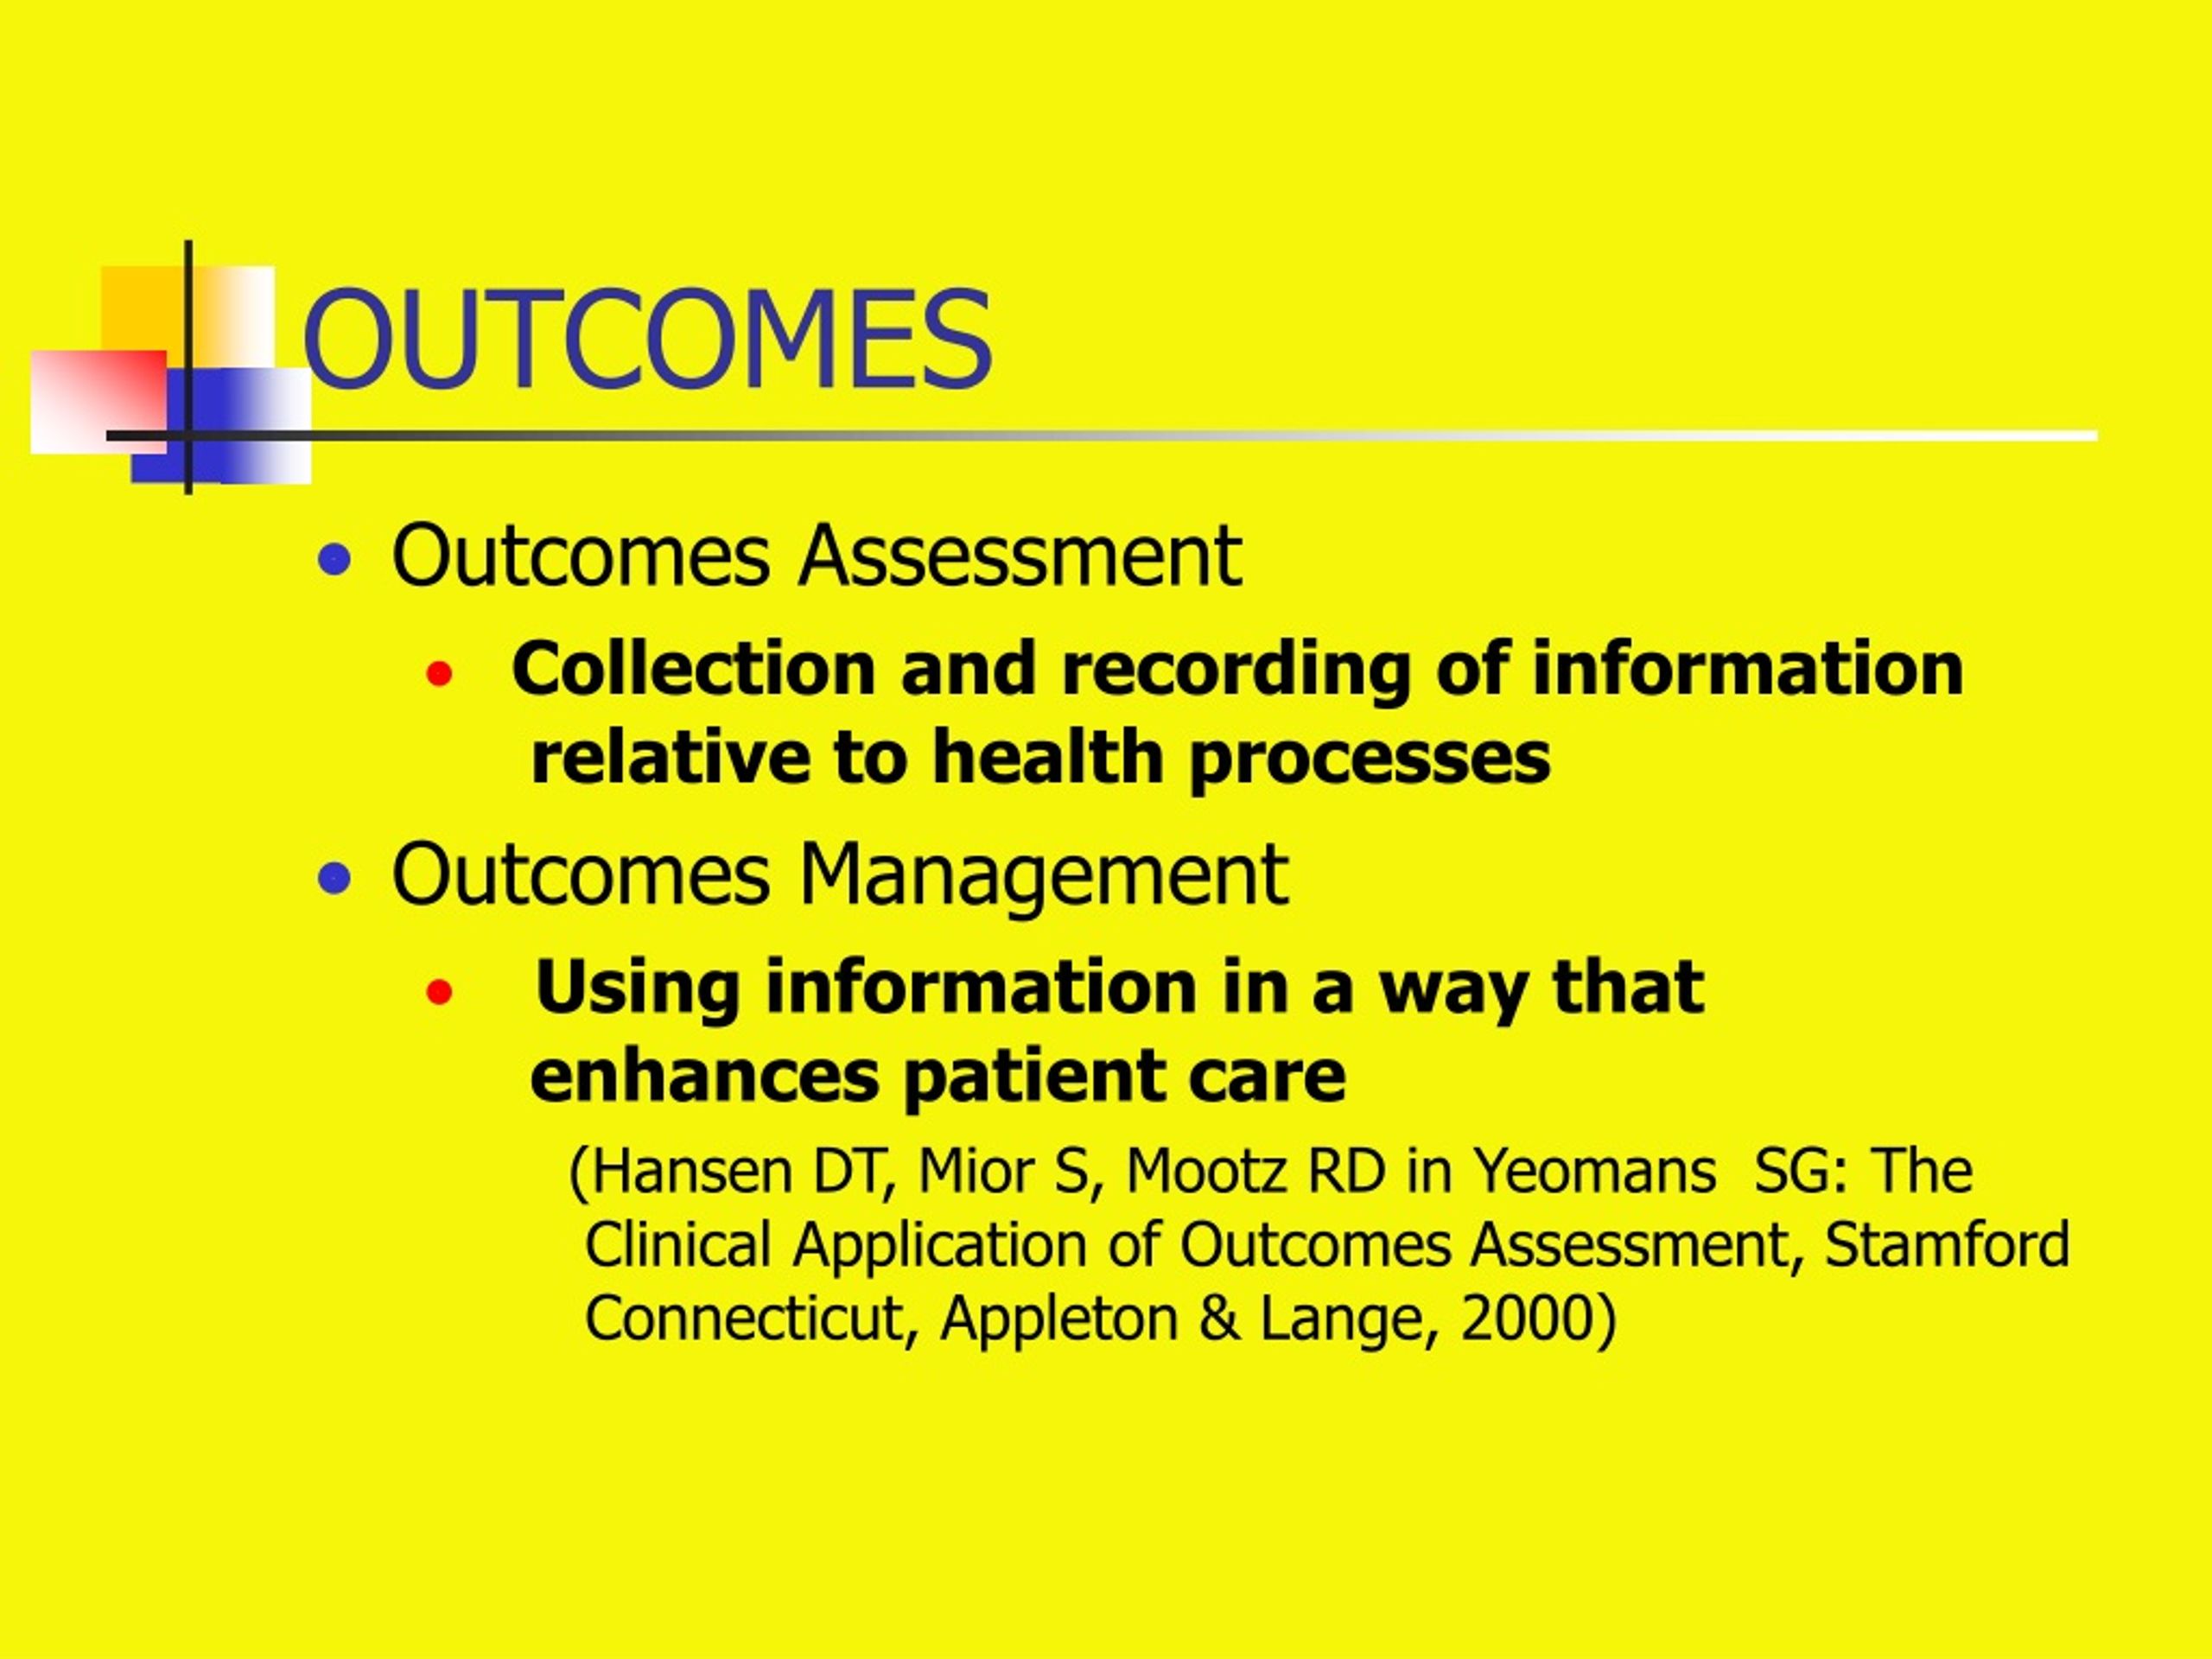 Ppt Documenting Medical Necessity Thru Outcomes Assessment Powerpoint Presentation Id9148991 0925